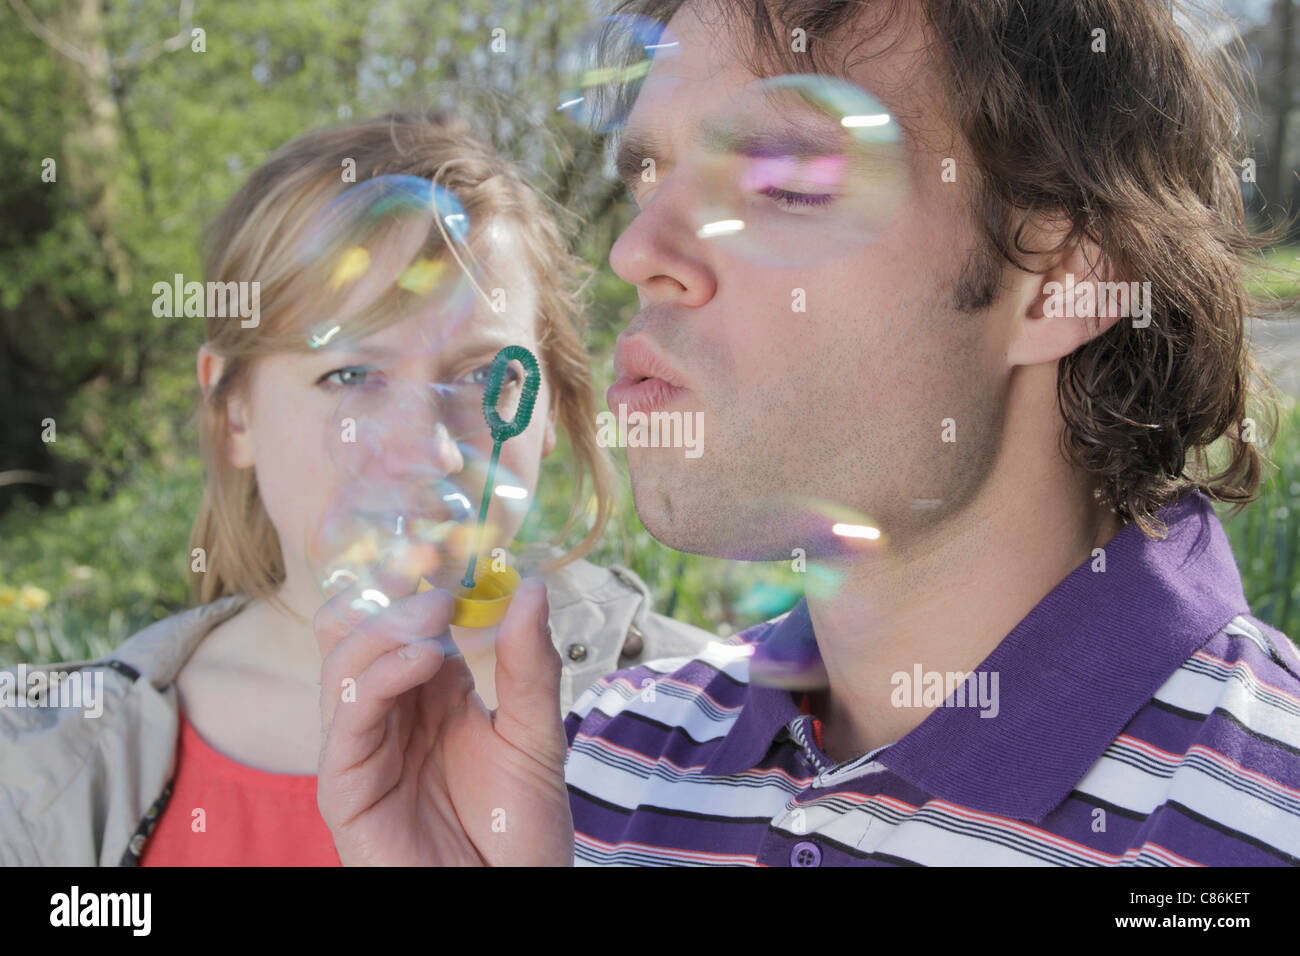 Couple blowing bubbles in park Stock Photo